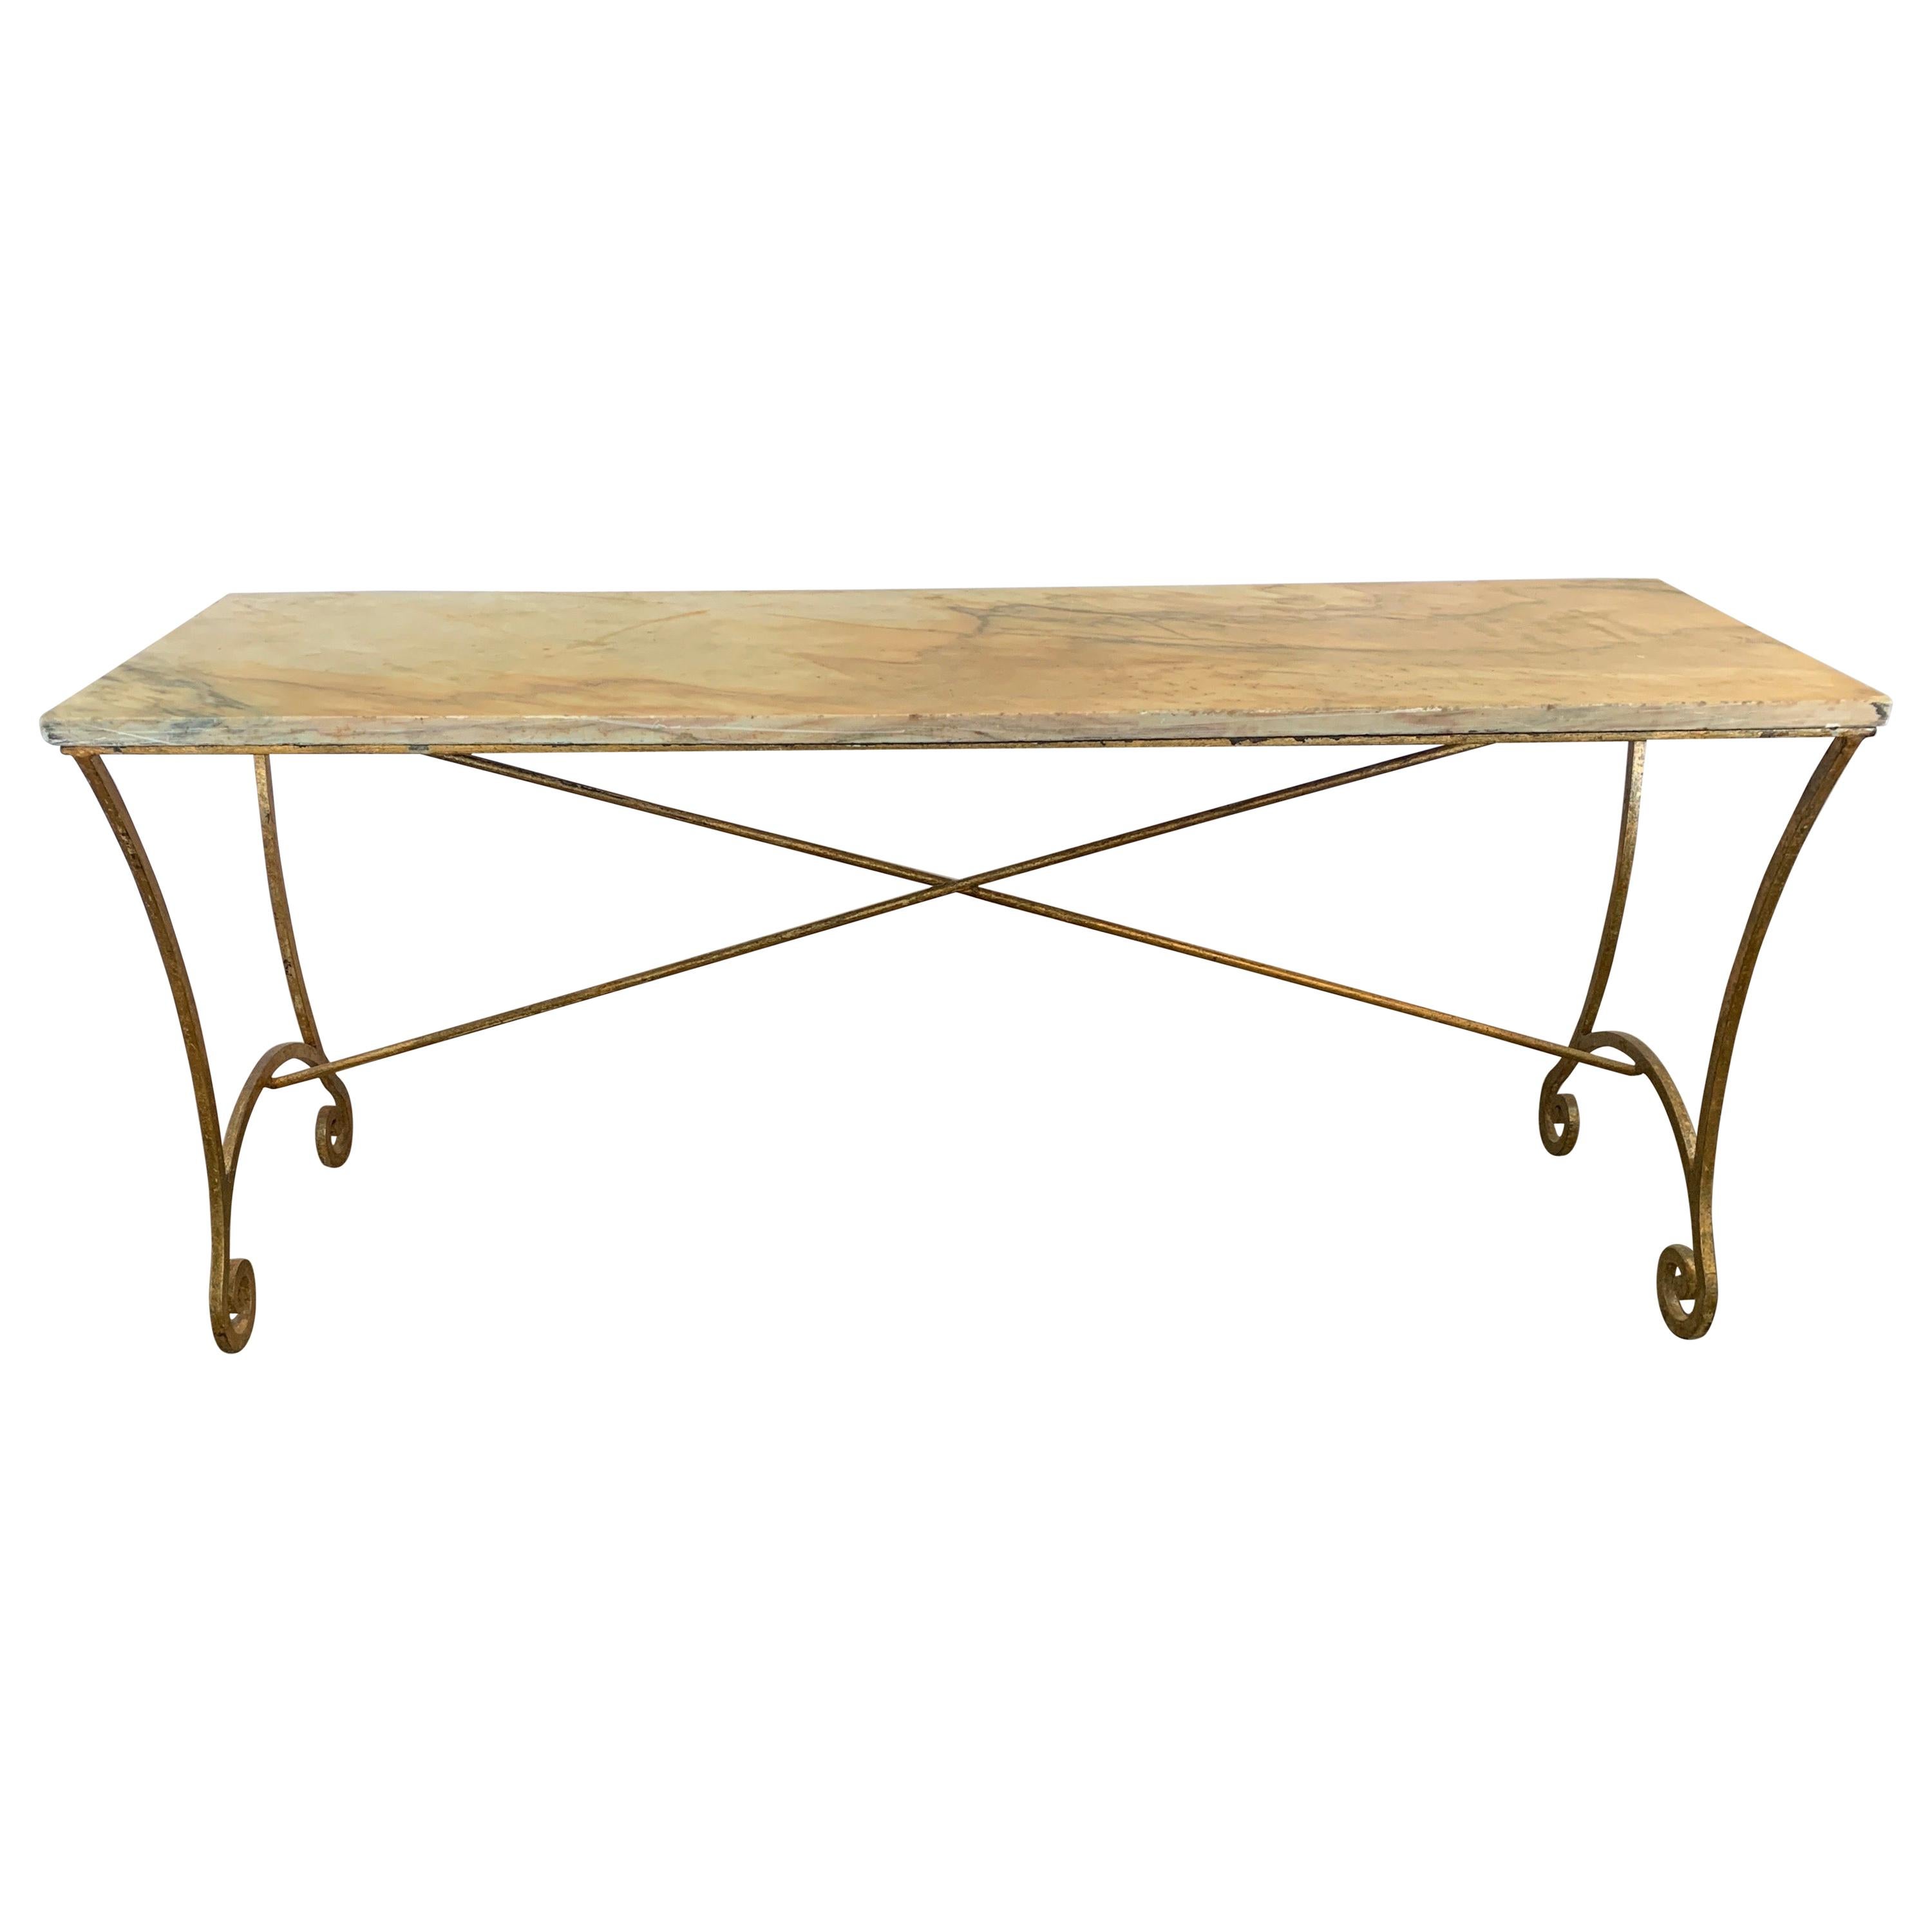 Spanish 19th Century Gilt Overlay on Iron with Antique Marble-Top Console